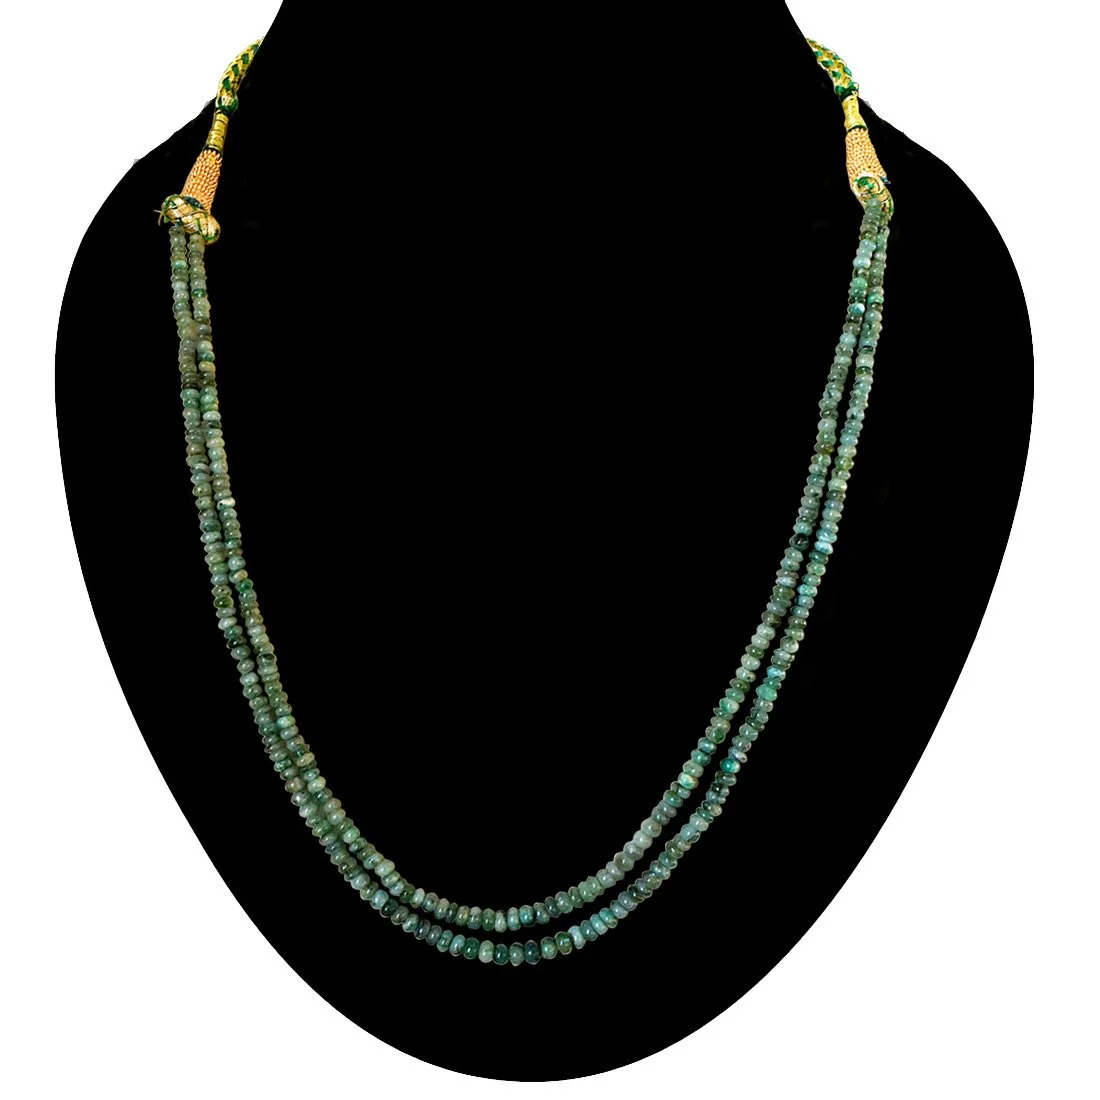 RS Earth Mined Green Emerald 882.00 Cts Amazing 2 Line Round Beads Necklace 